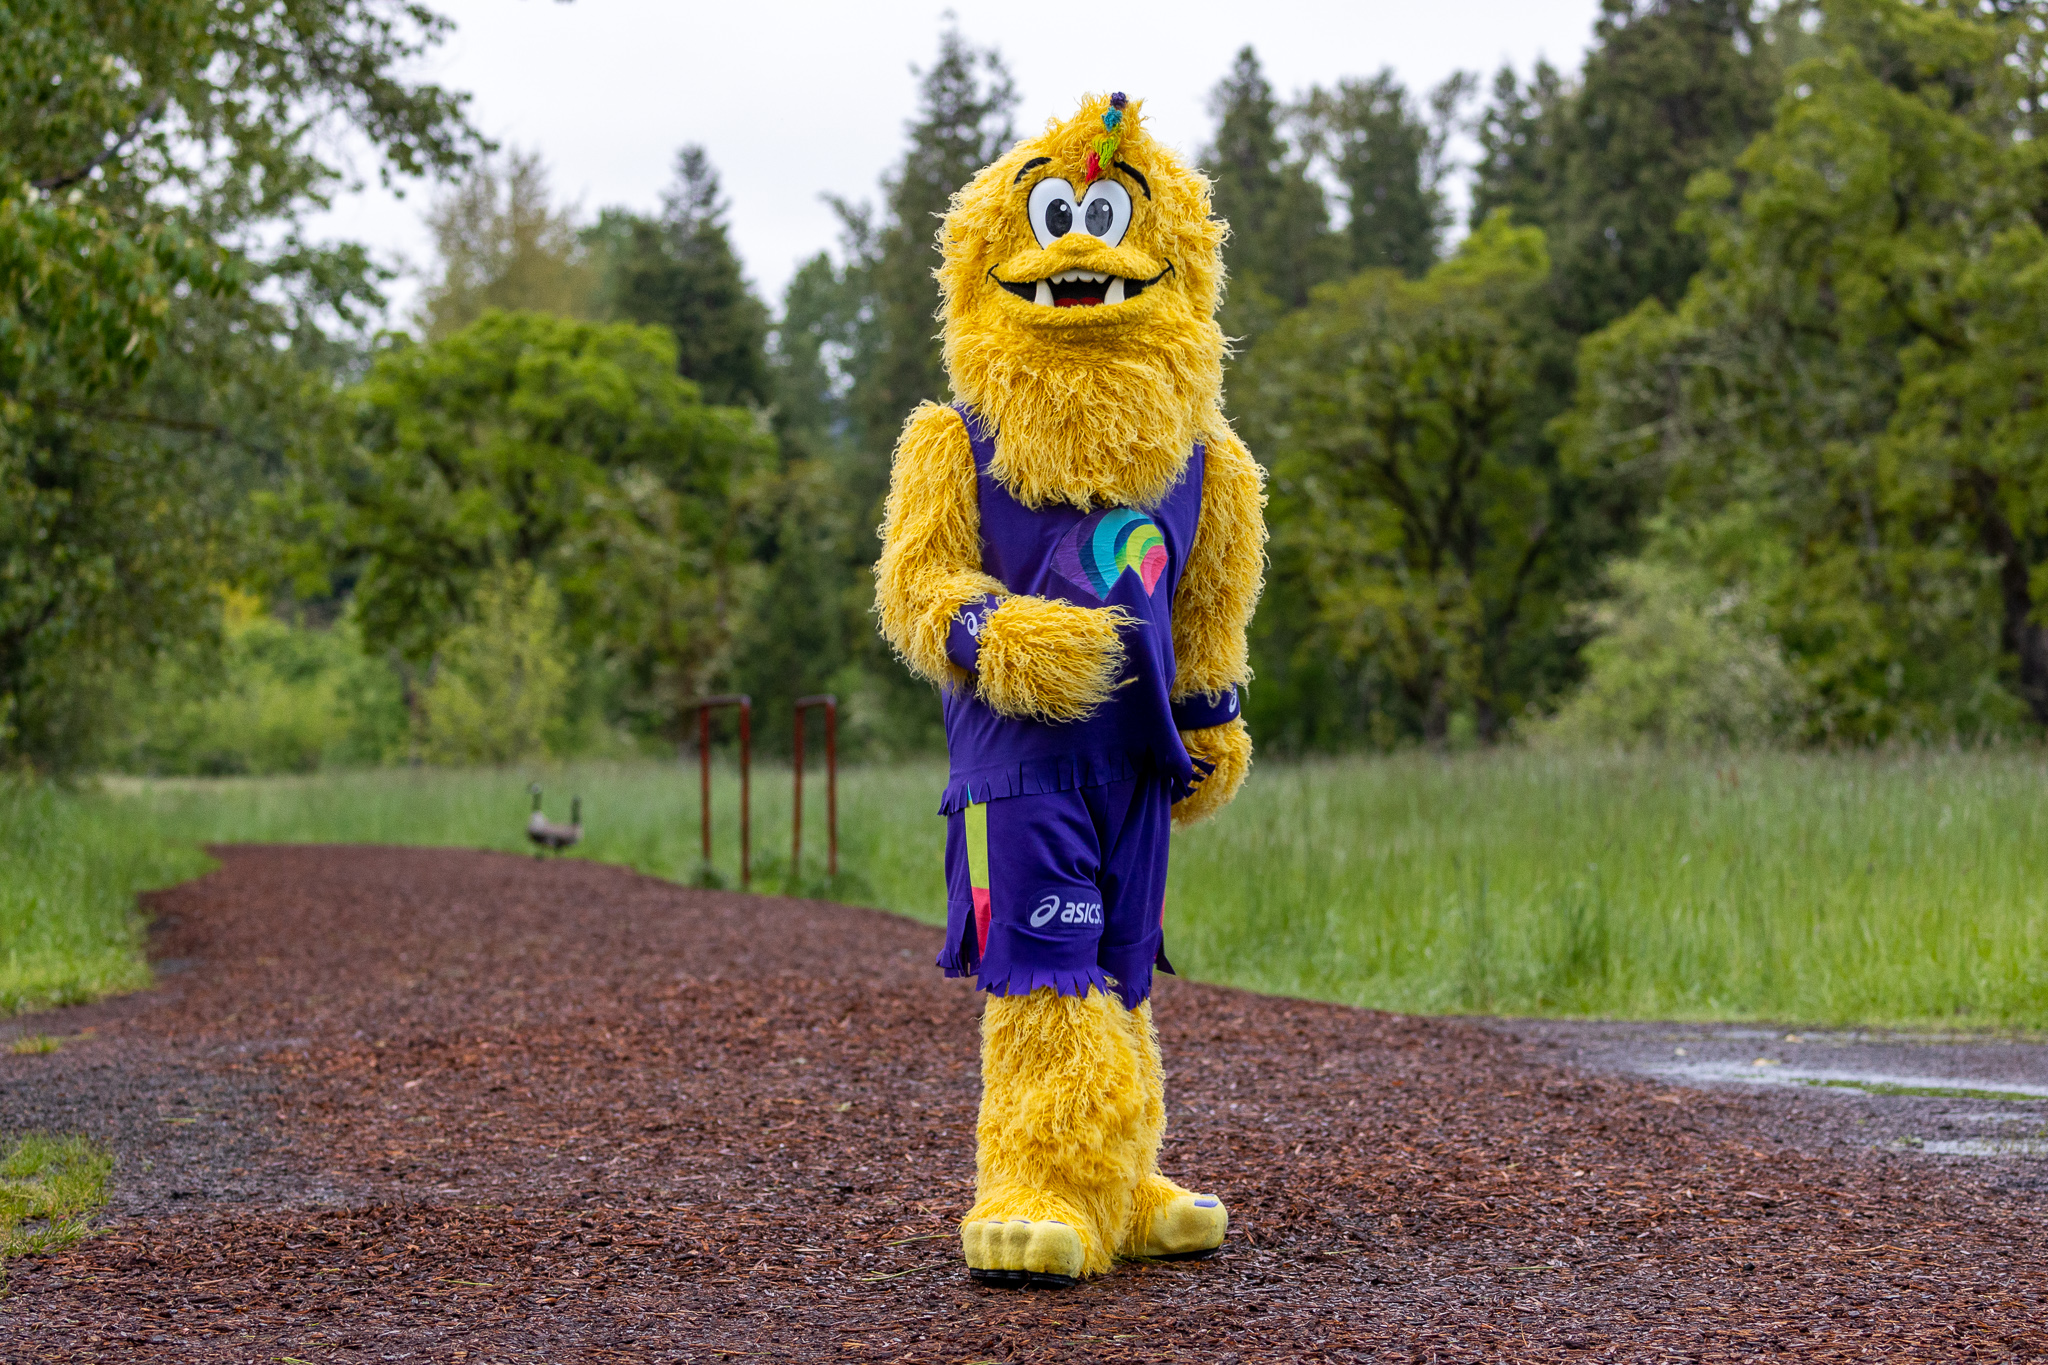 Oregon22 turns to a “Legend” as its mascot for World Athletics Championships